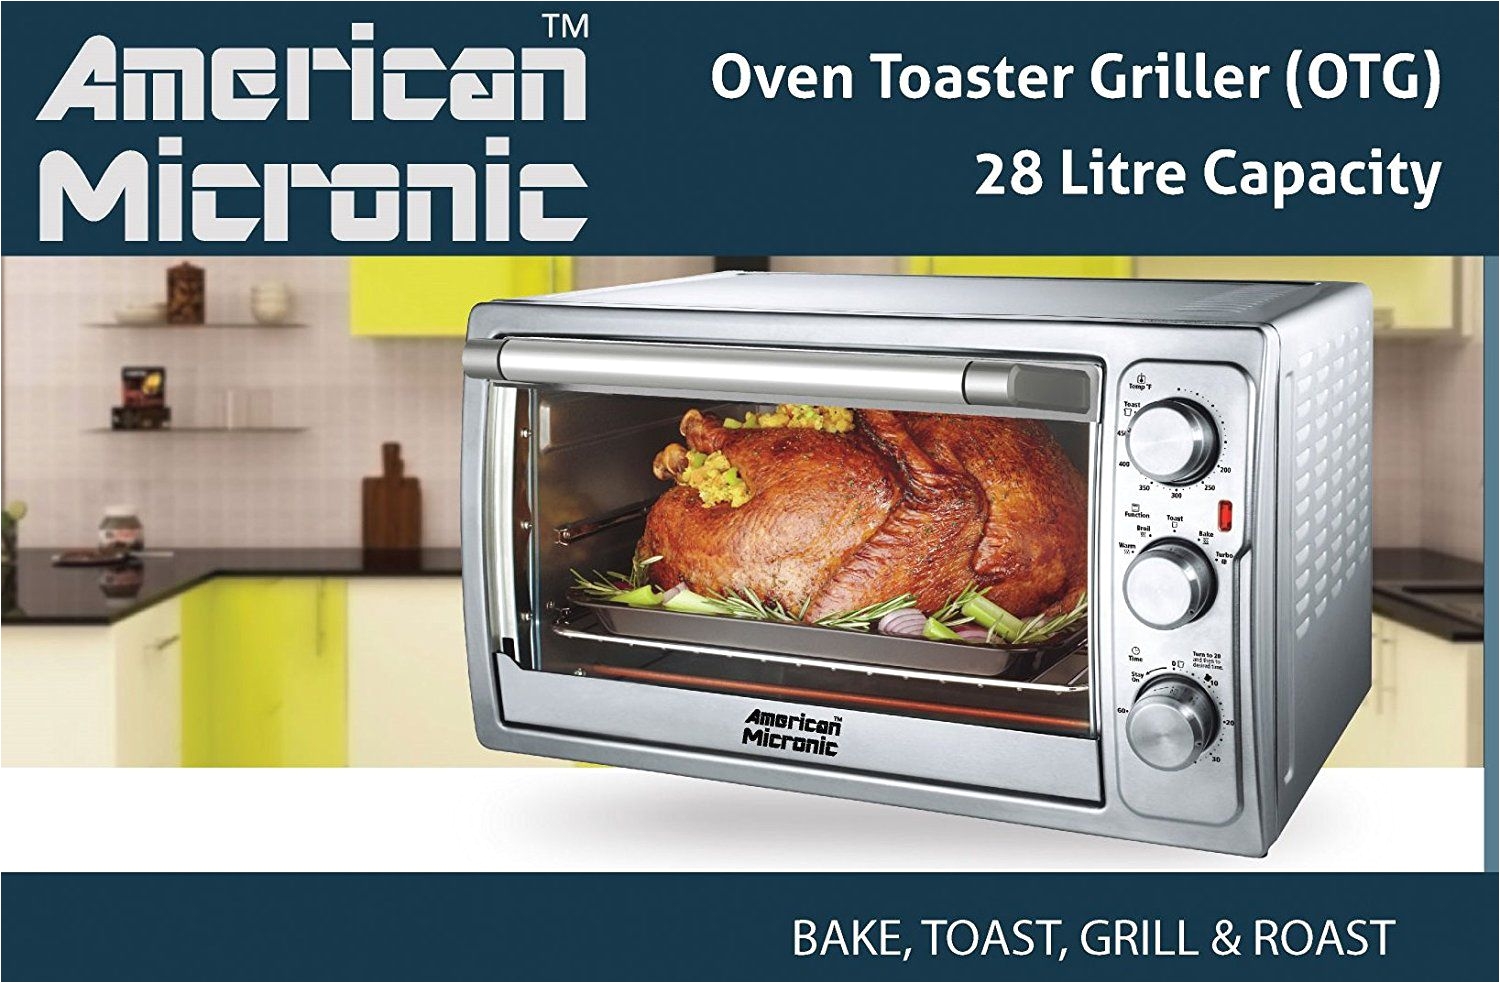 american micronic 28l otg oven toaster grill 1500 w